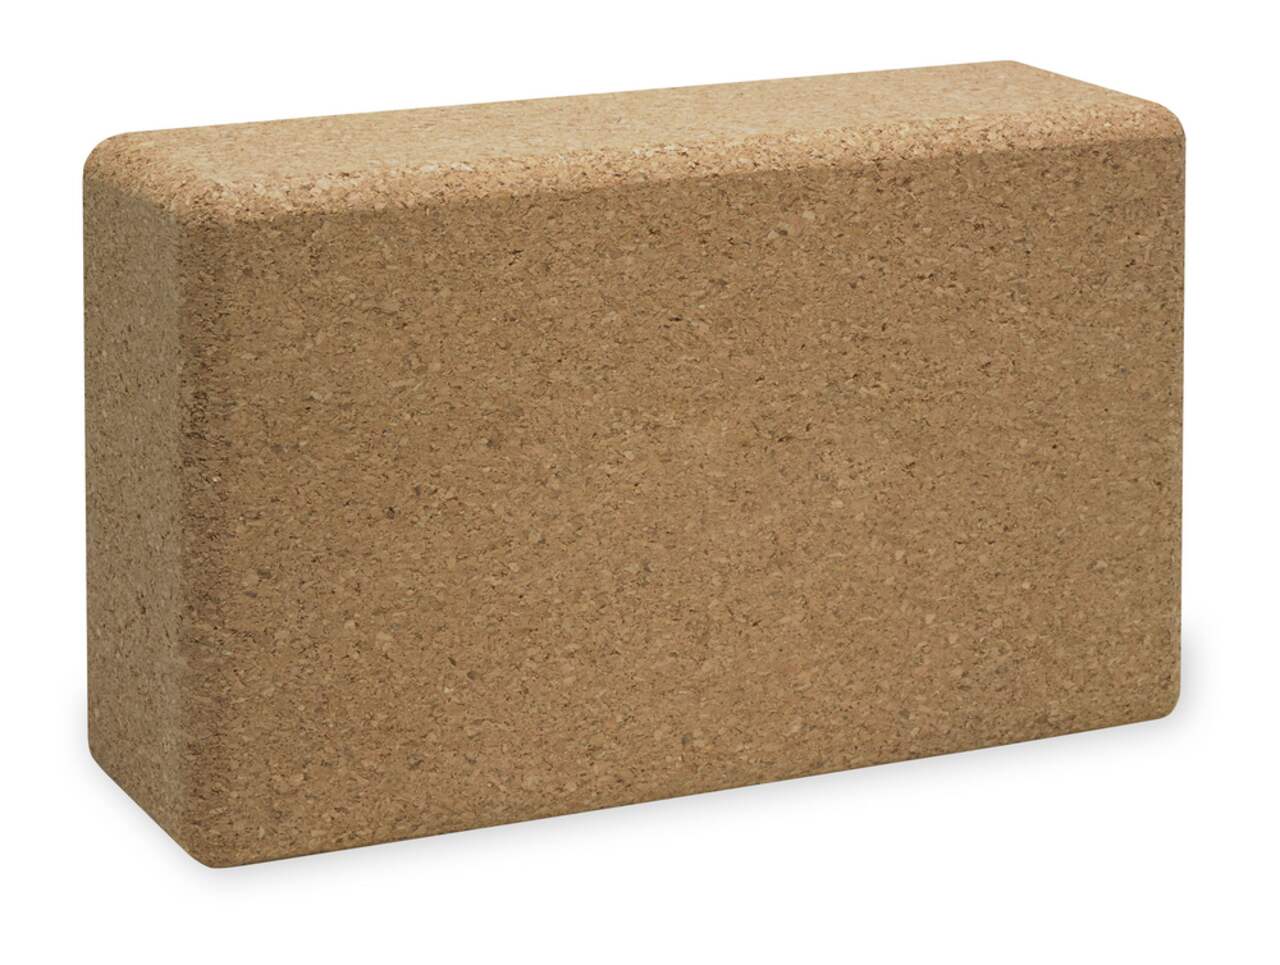 https://media-www.canadiantire.ca/product/playing/exercise/exercise-accessories/1840612/gaiam-yoga-brick-cork-2b81c144-4489-475f-924b-d472ce0aa161.png?imdensity=1&imwidth=1244&impolicy=mZoom